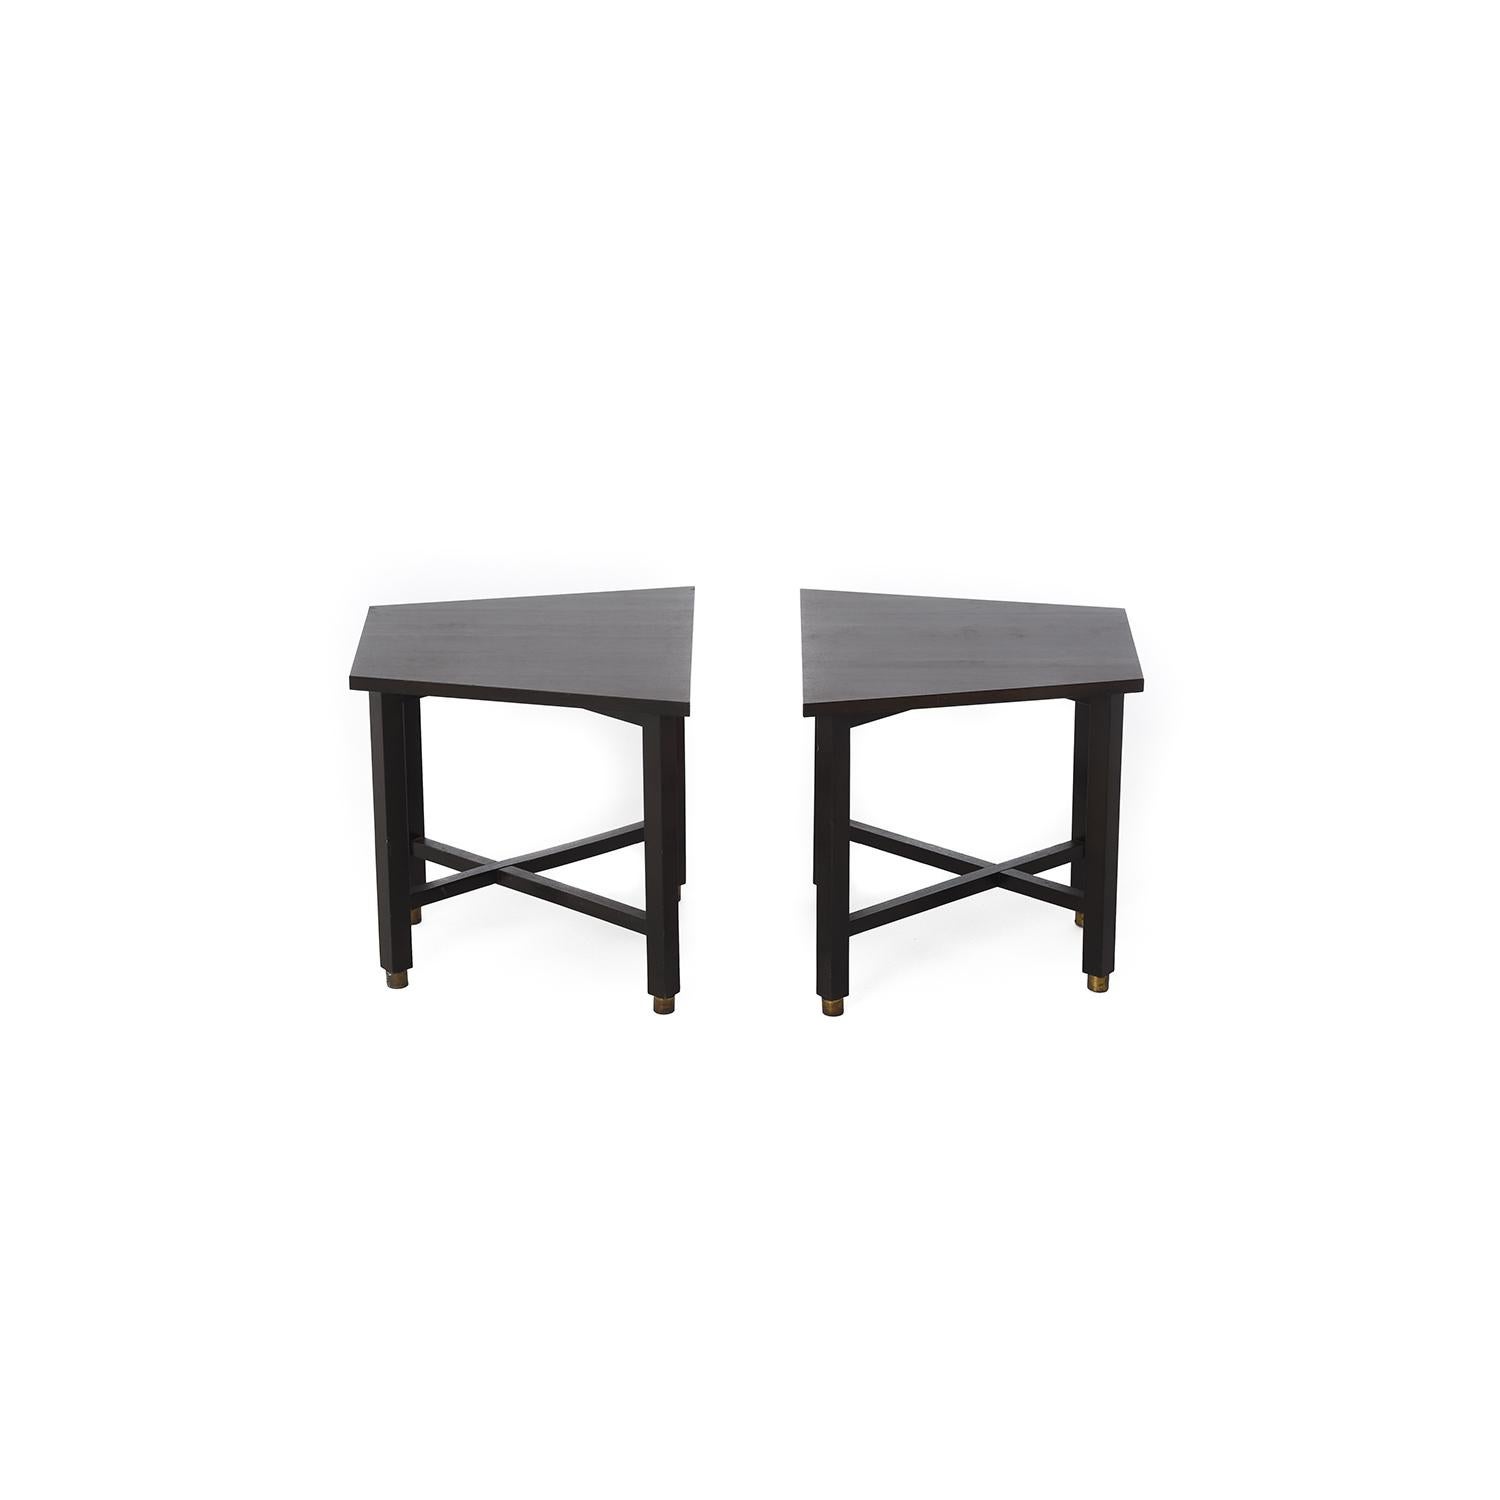 This snappy set of end tables by Edward Wormley are constructed with Formica tops in a dark faux wood grain. The leg bases are black heavyweight wood with brushed brass tone ferrules at the feet. 

Professional, skilled furniture restoration is an